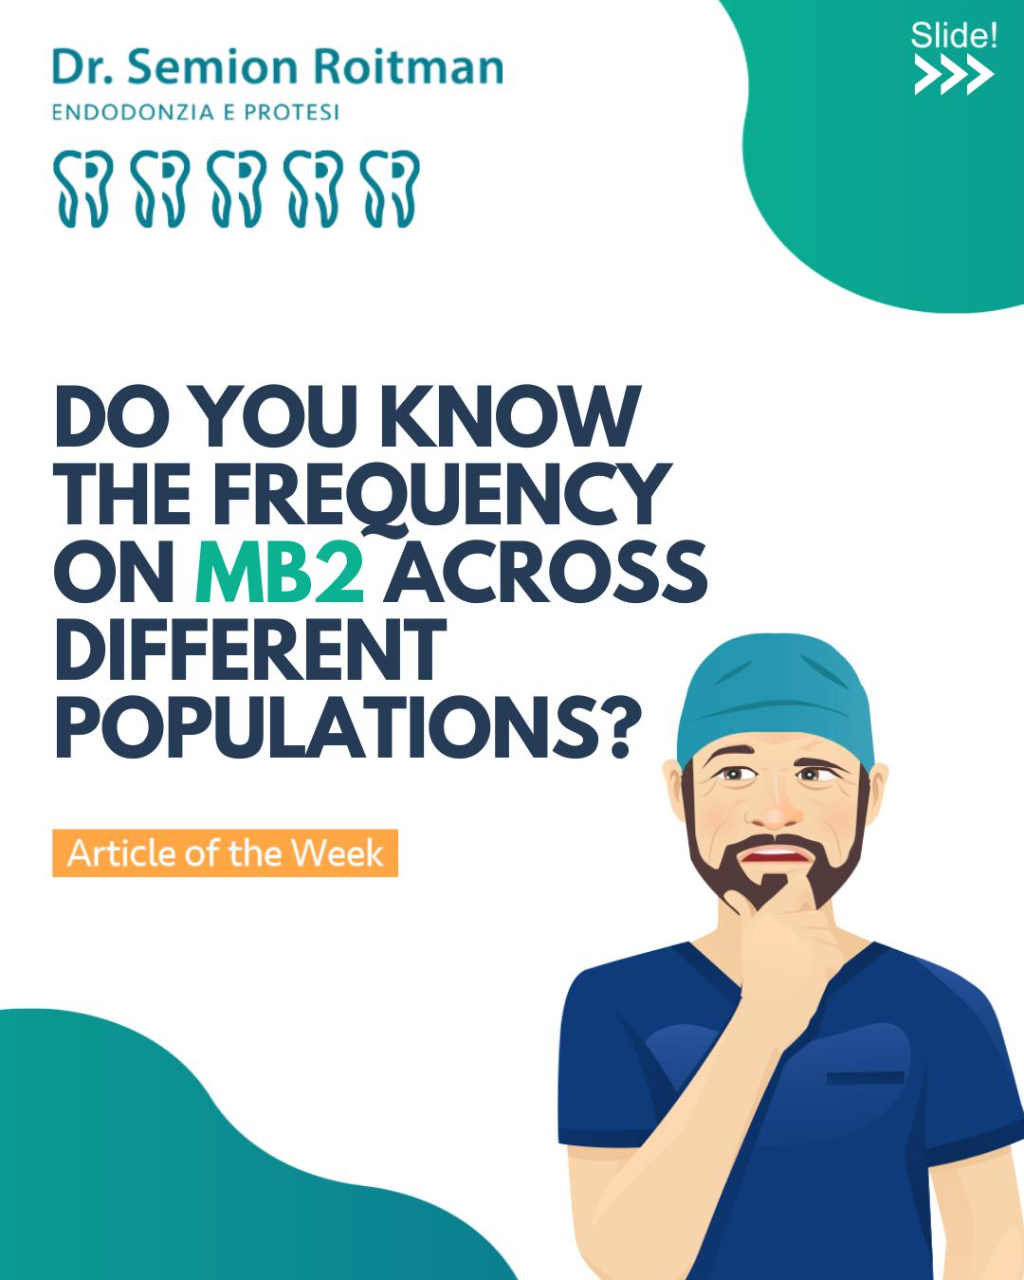 Do you know the frequency on MB2 across different populations?